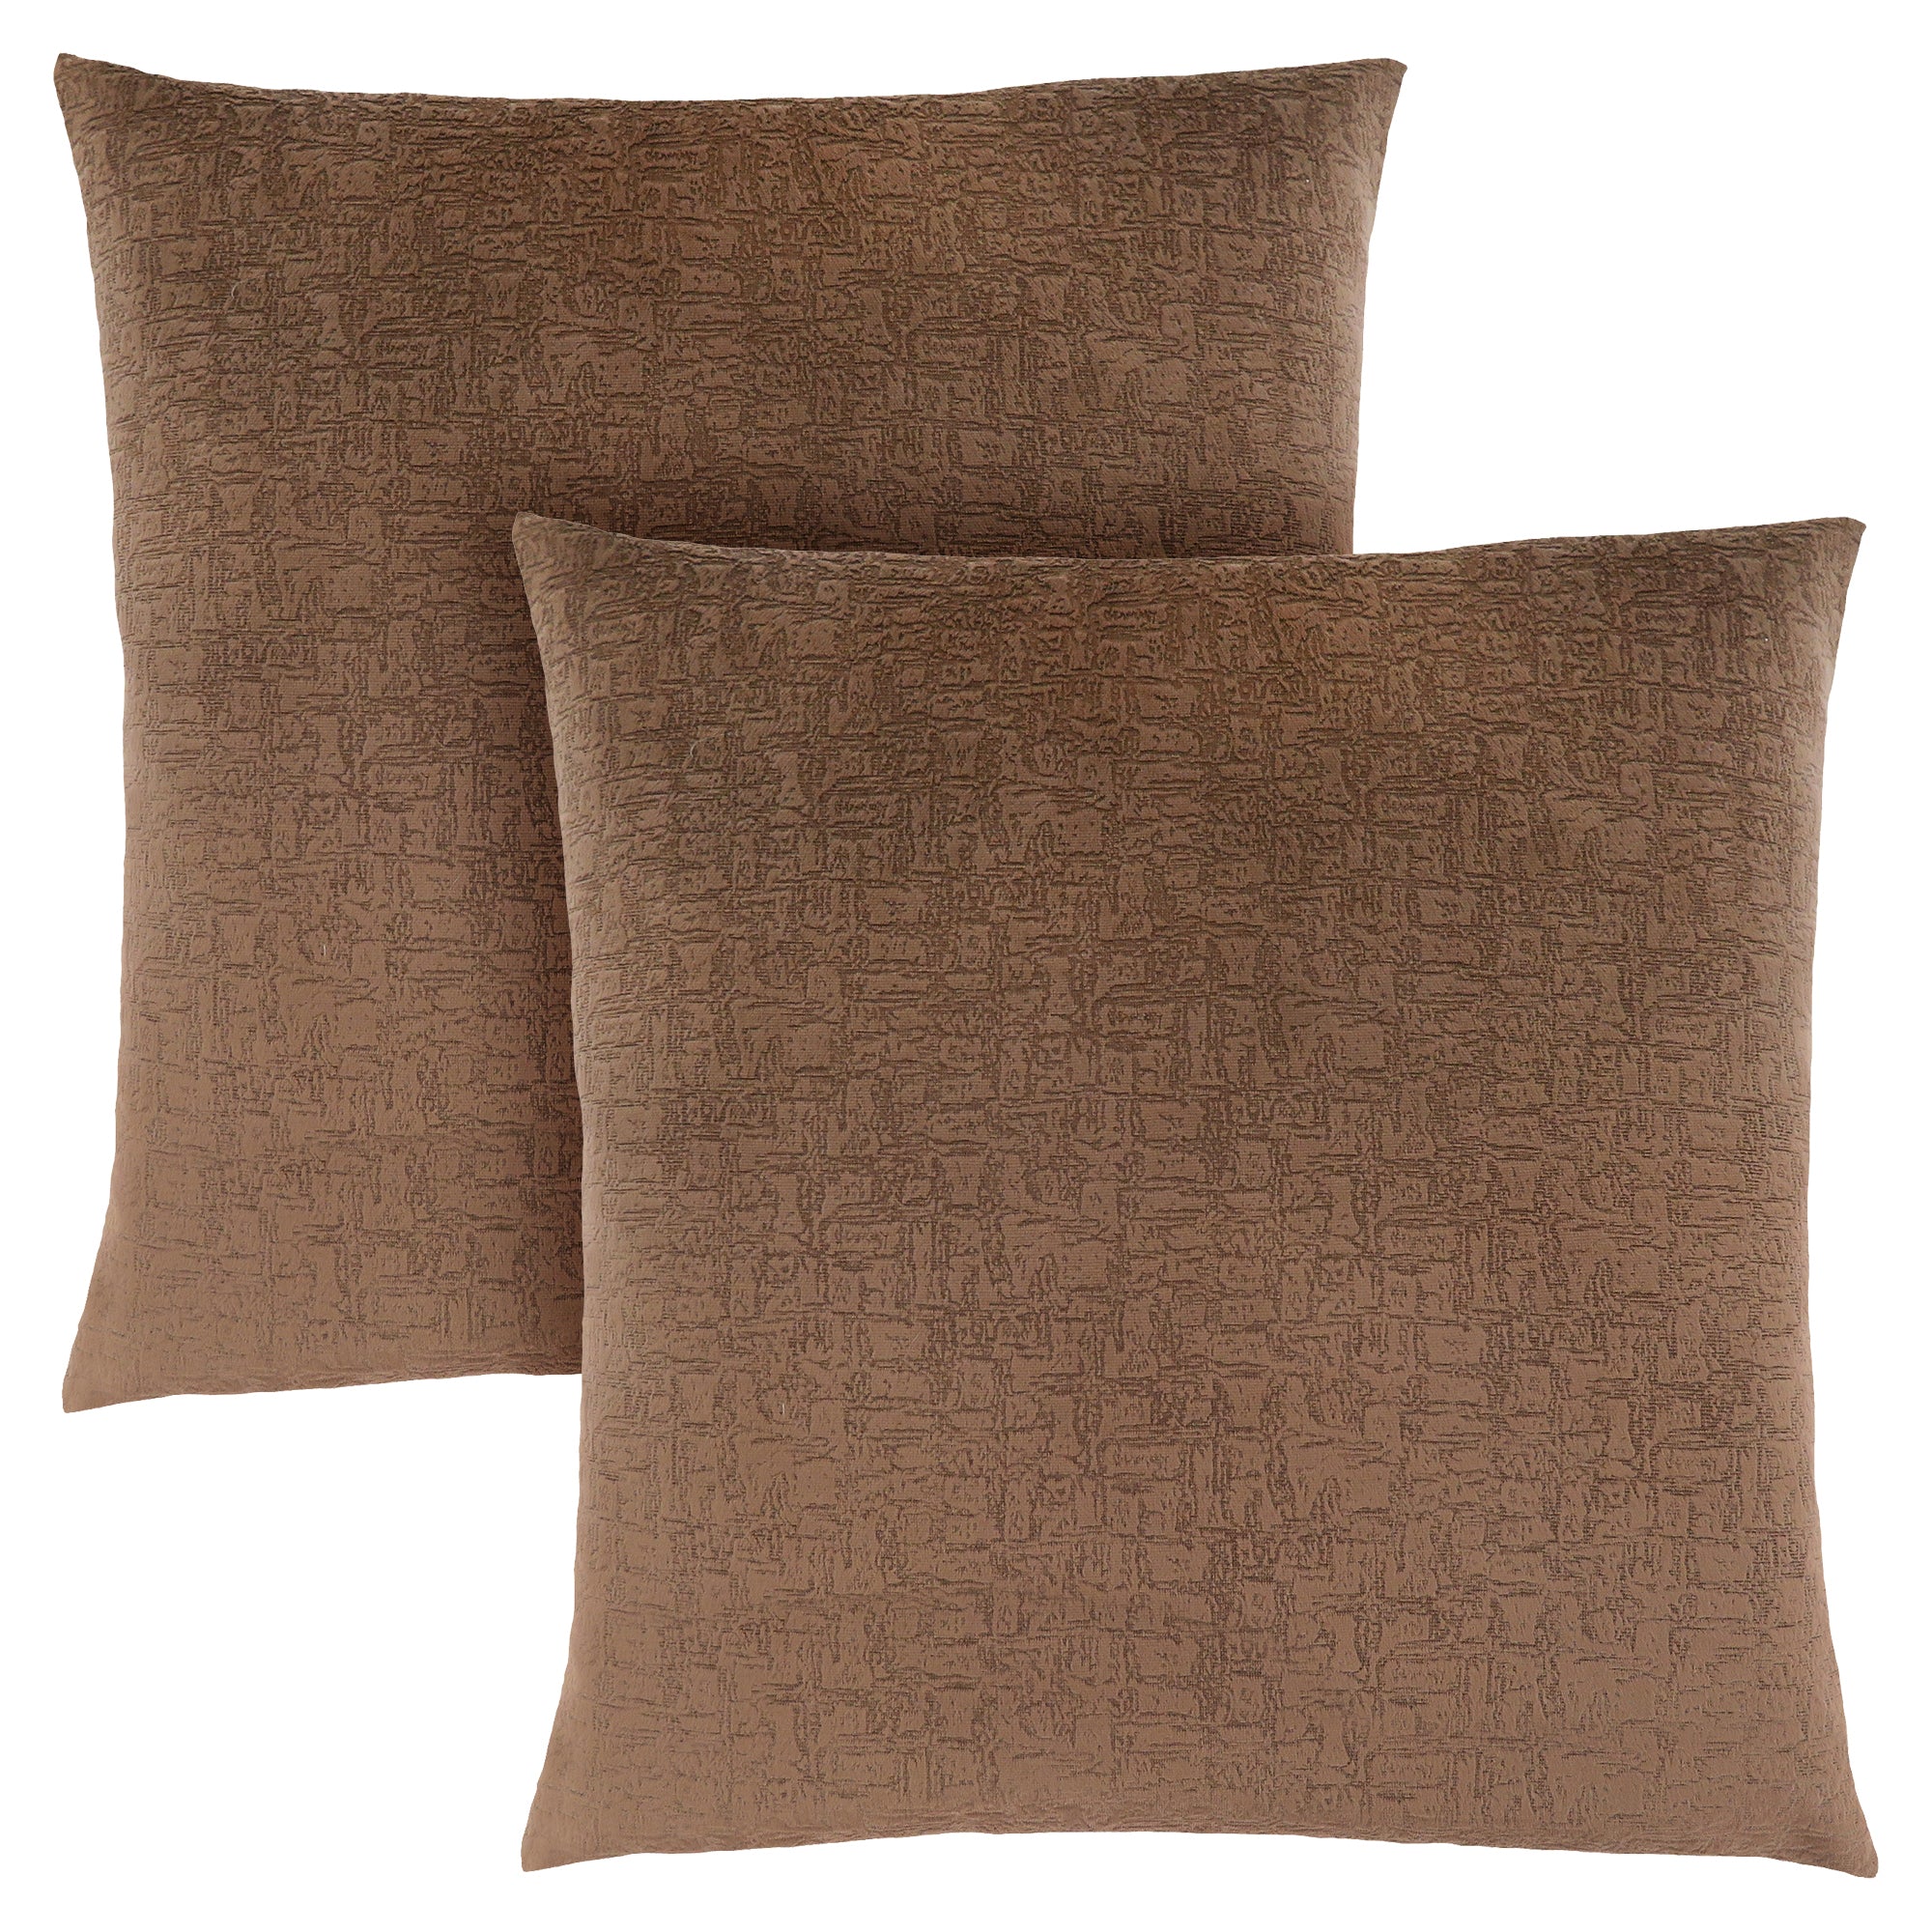 MN-759277    Pillows, Set Of 2, 18 X 18 Square, Insert Included, Decorative Throw, Accent, Sofa, Couch, Bed, Plush Velvet Finish, Soft Polyester Fabric, Hypoallergenic Soft Polyester Insert, Light Brown, Contemporary, Modern